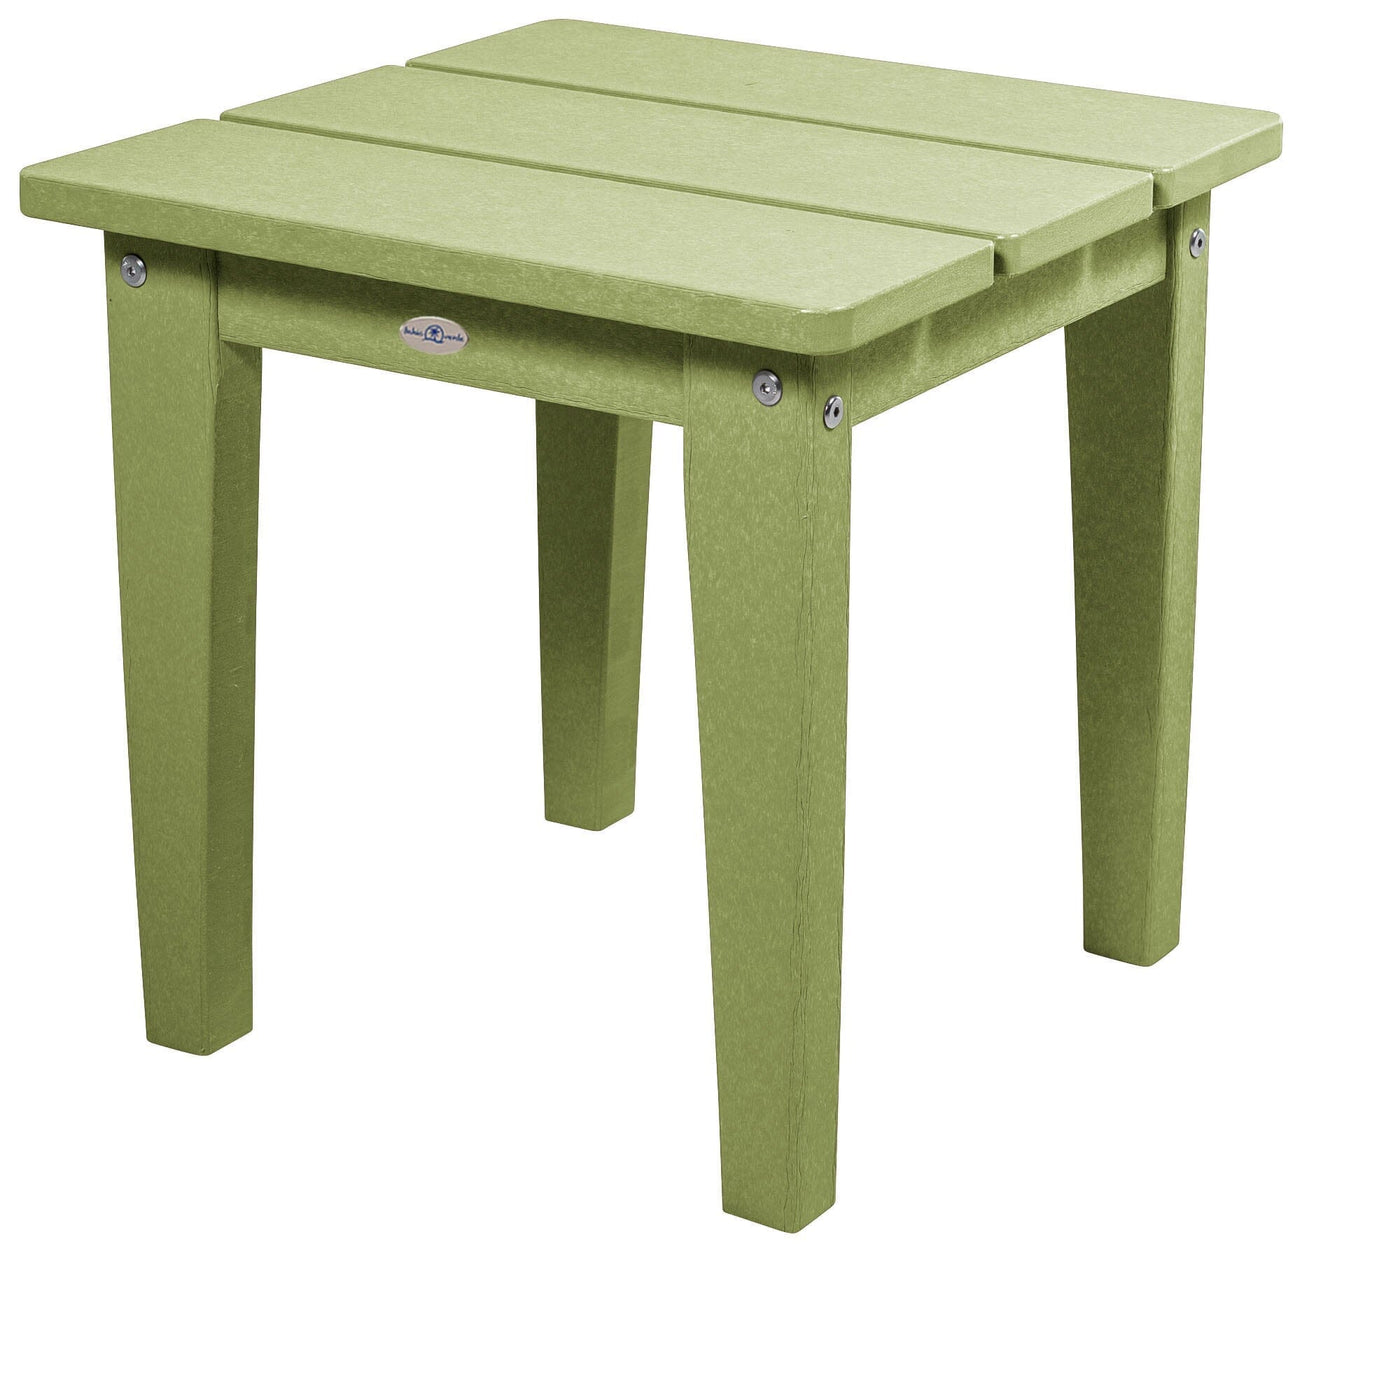 Cape Adirondack Small Side Table Table Bahia Verde Outdoors Palm Green 